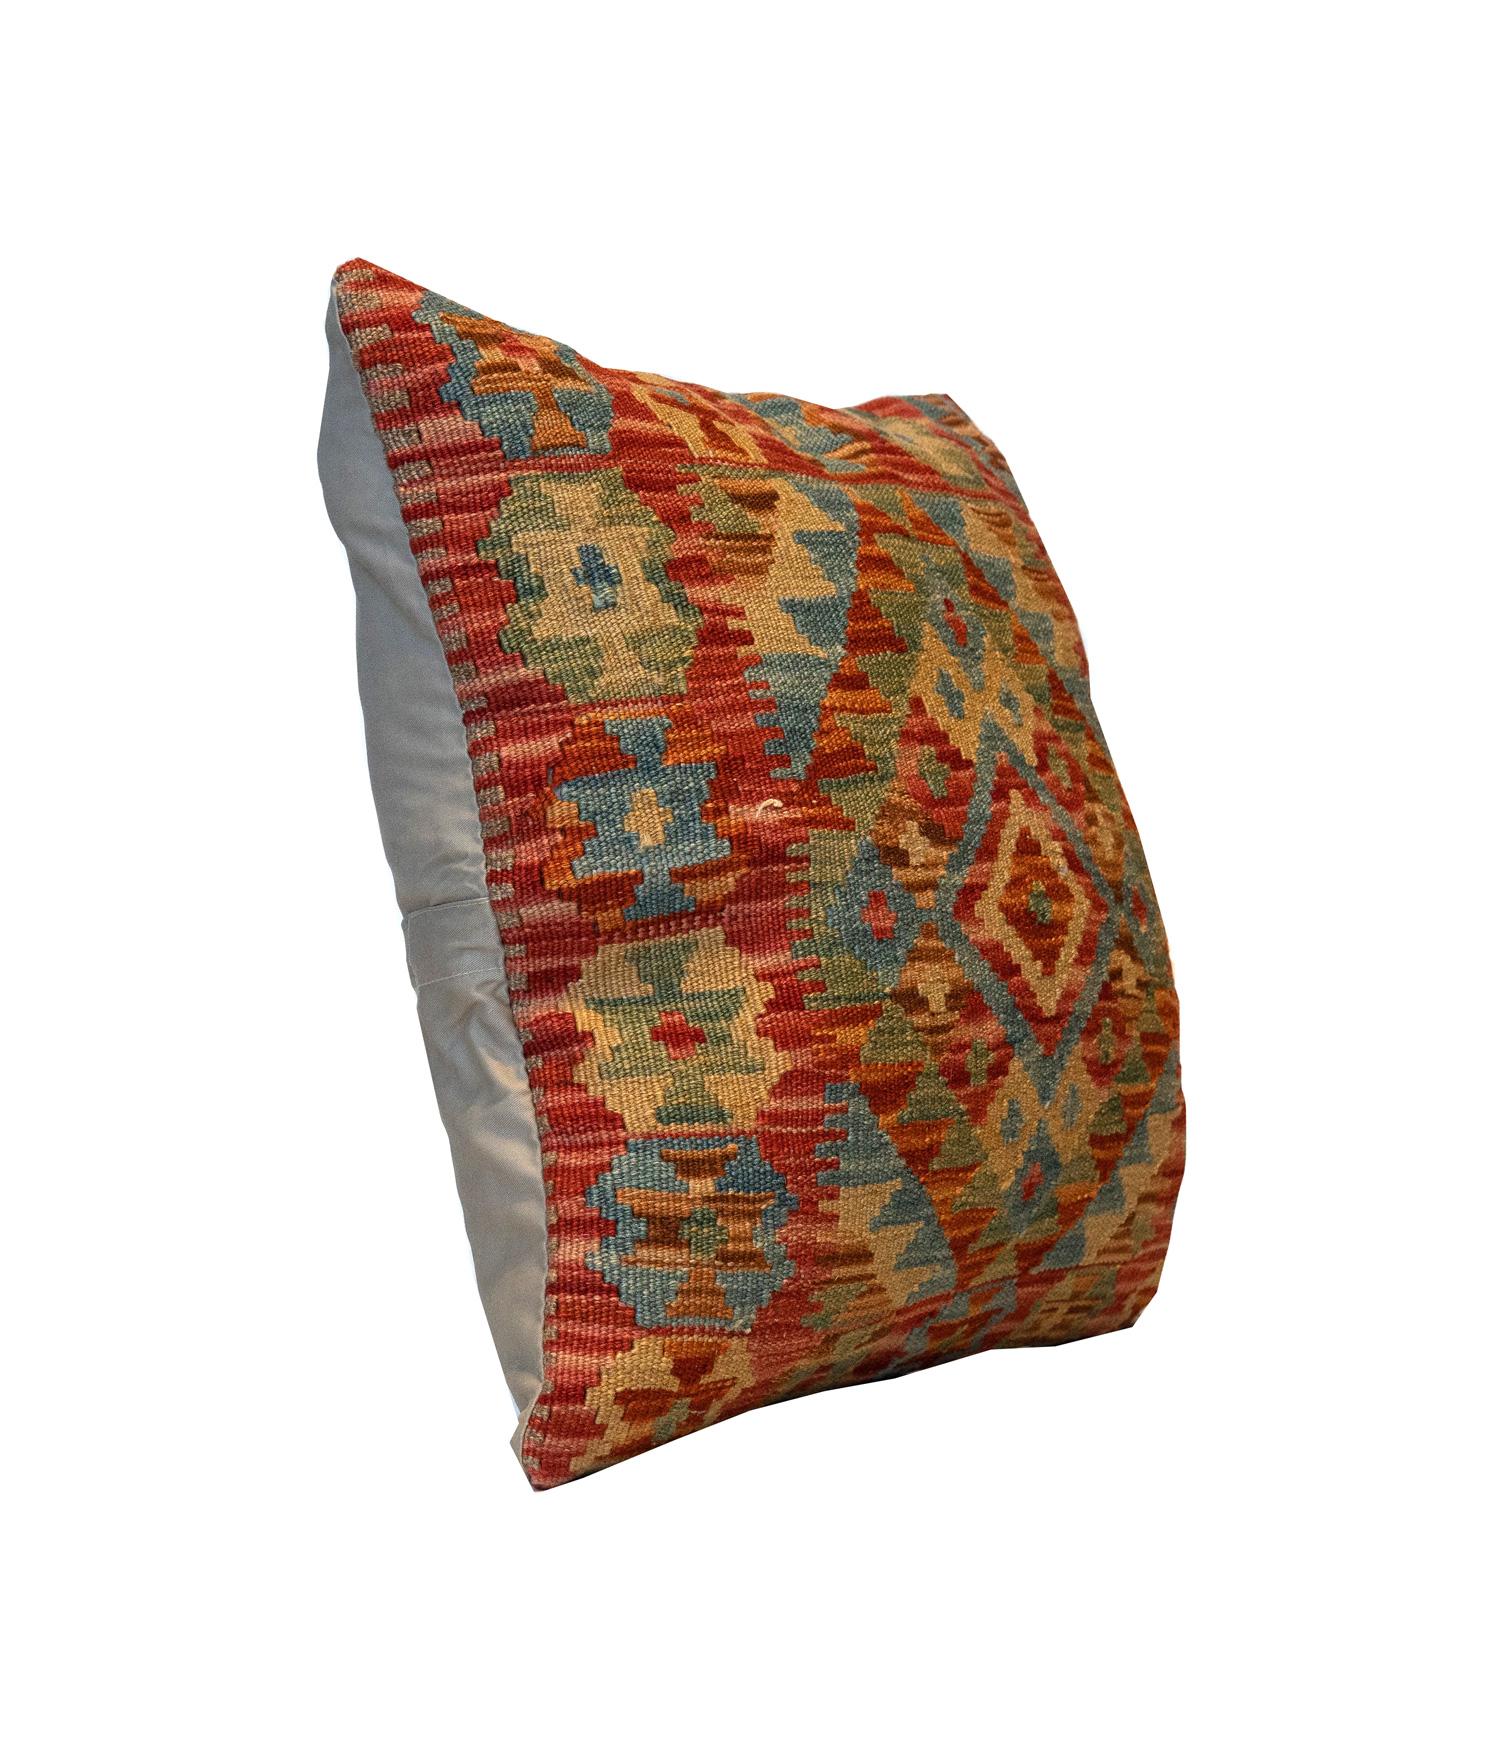 This fantastic cushion has been woven by hand using traditional kilim weaving techniques with hand-spun wool. Featuring a symmetrical geometric pattern woven in beautiful rustic colours. Including an olive green, rust orange, red and blue. These